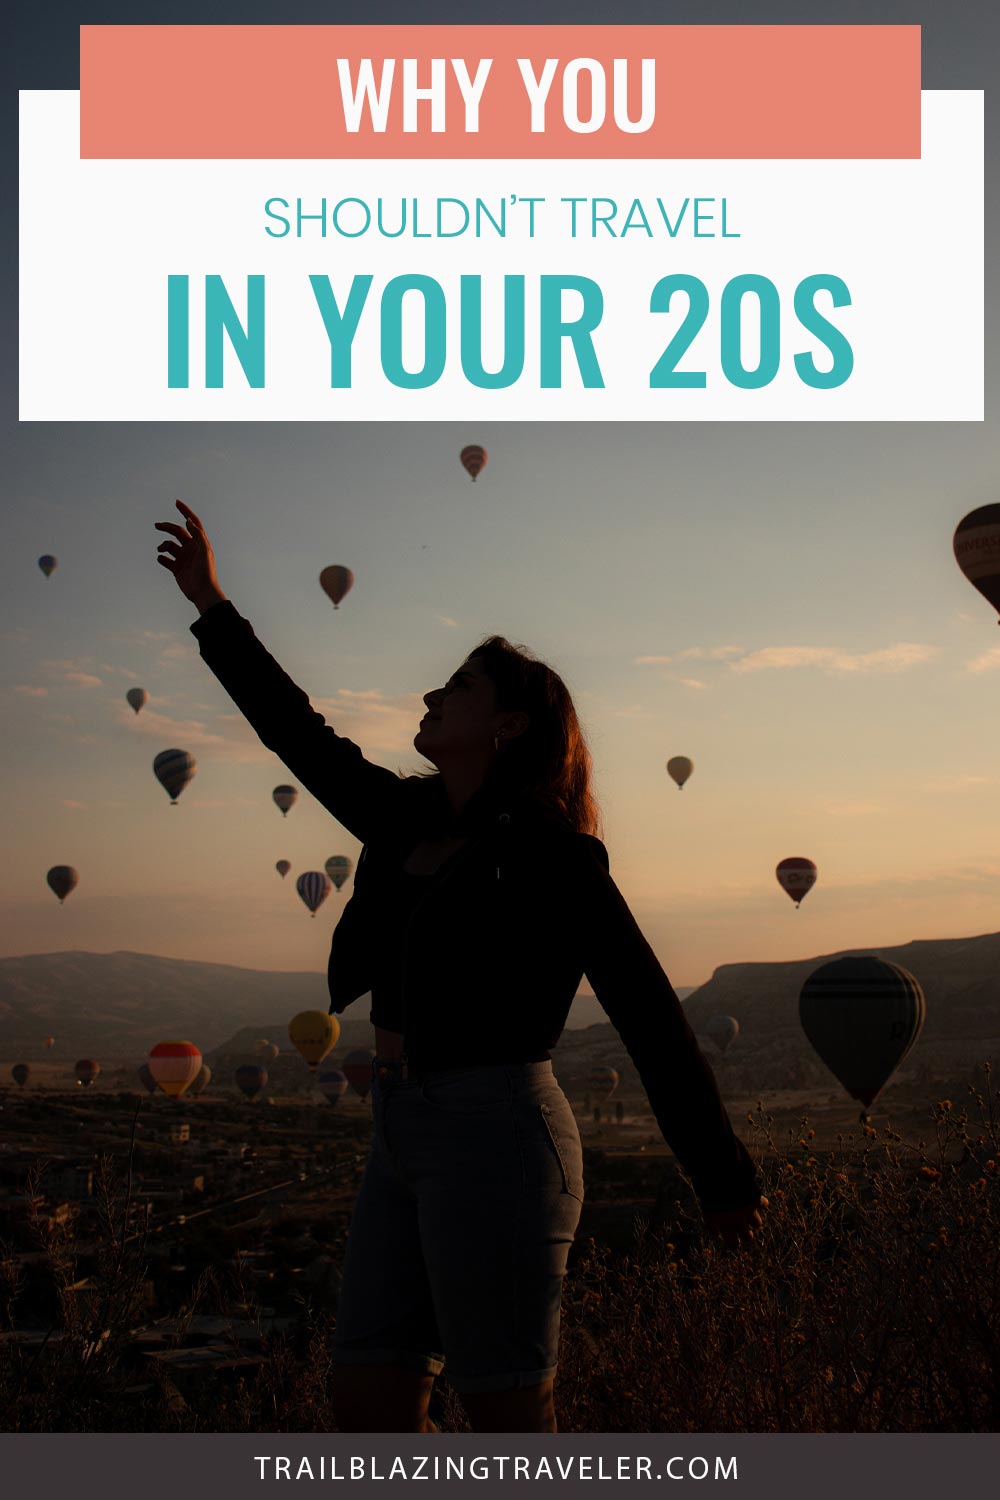 Why You Shouldn’t Travel In Your 20s